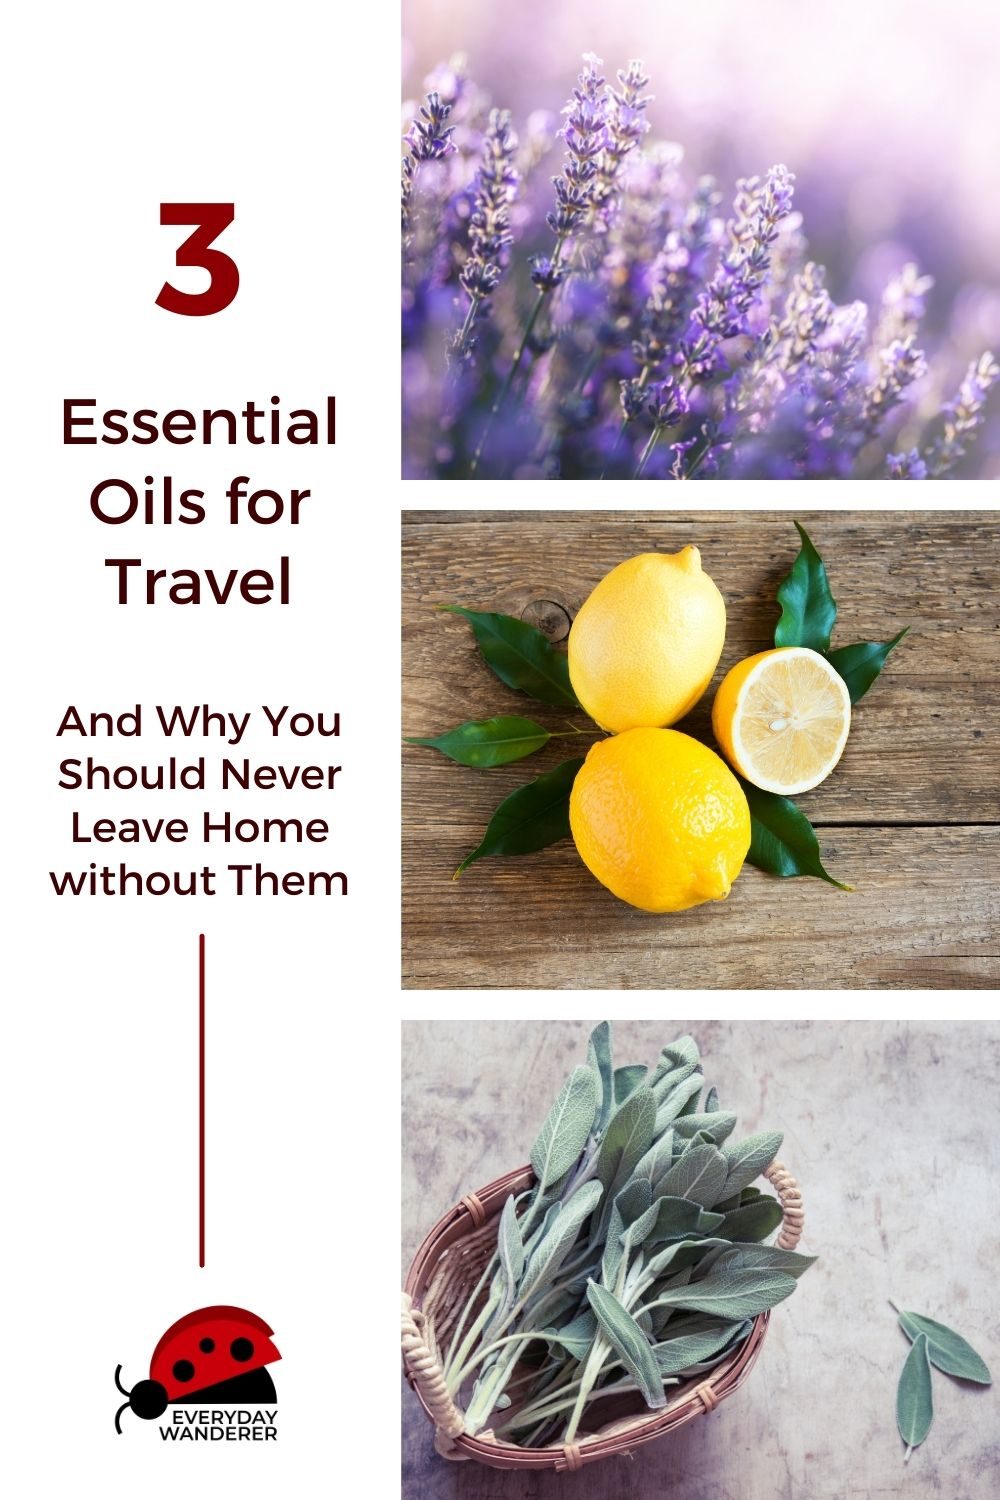 Essential Oils for Travel - Pin 5 - JPG